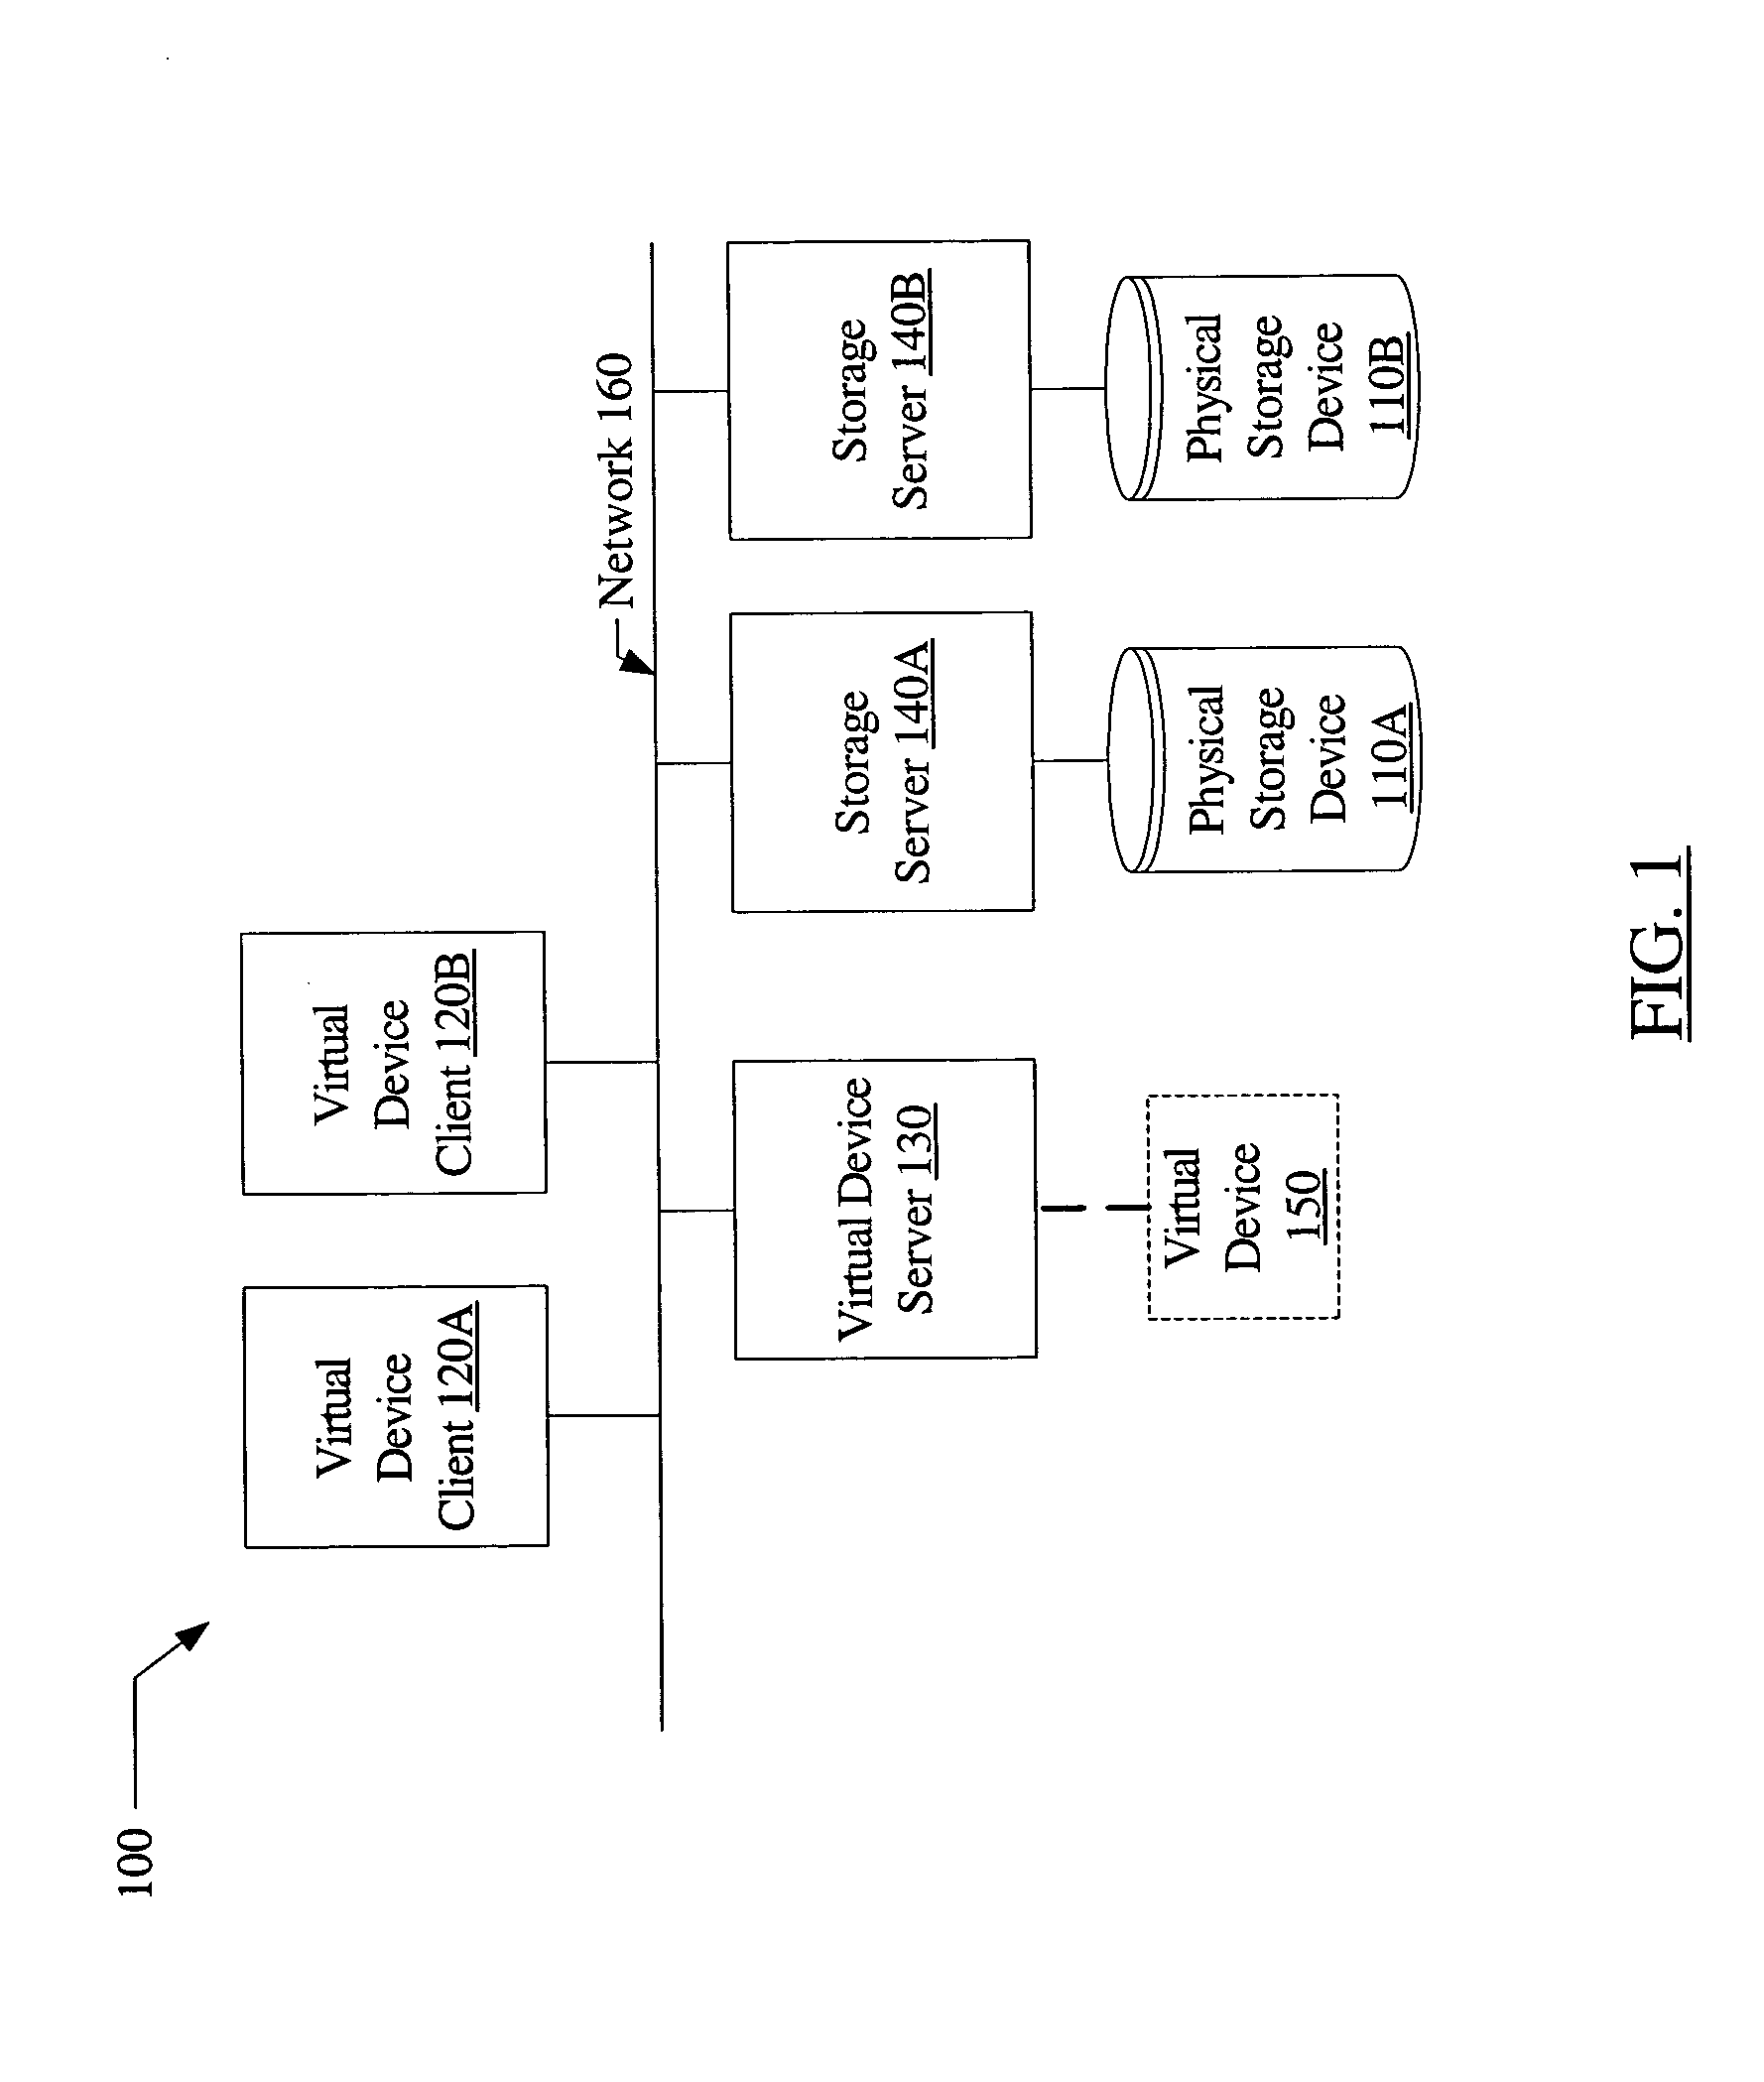 System and method for write forwarding in a storage environment employing distributed virtualization